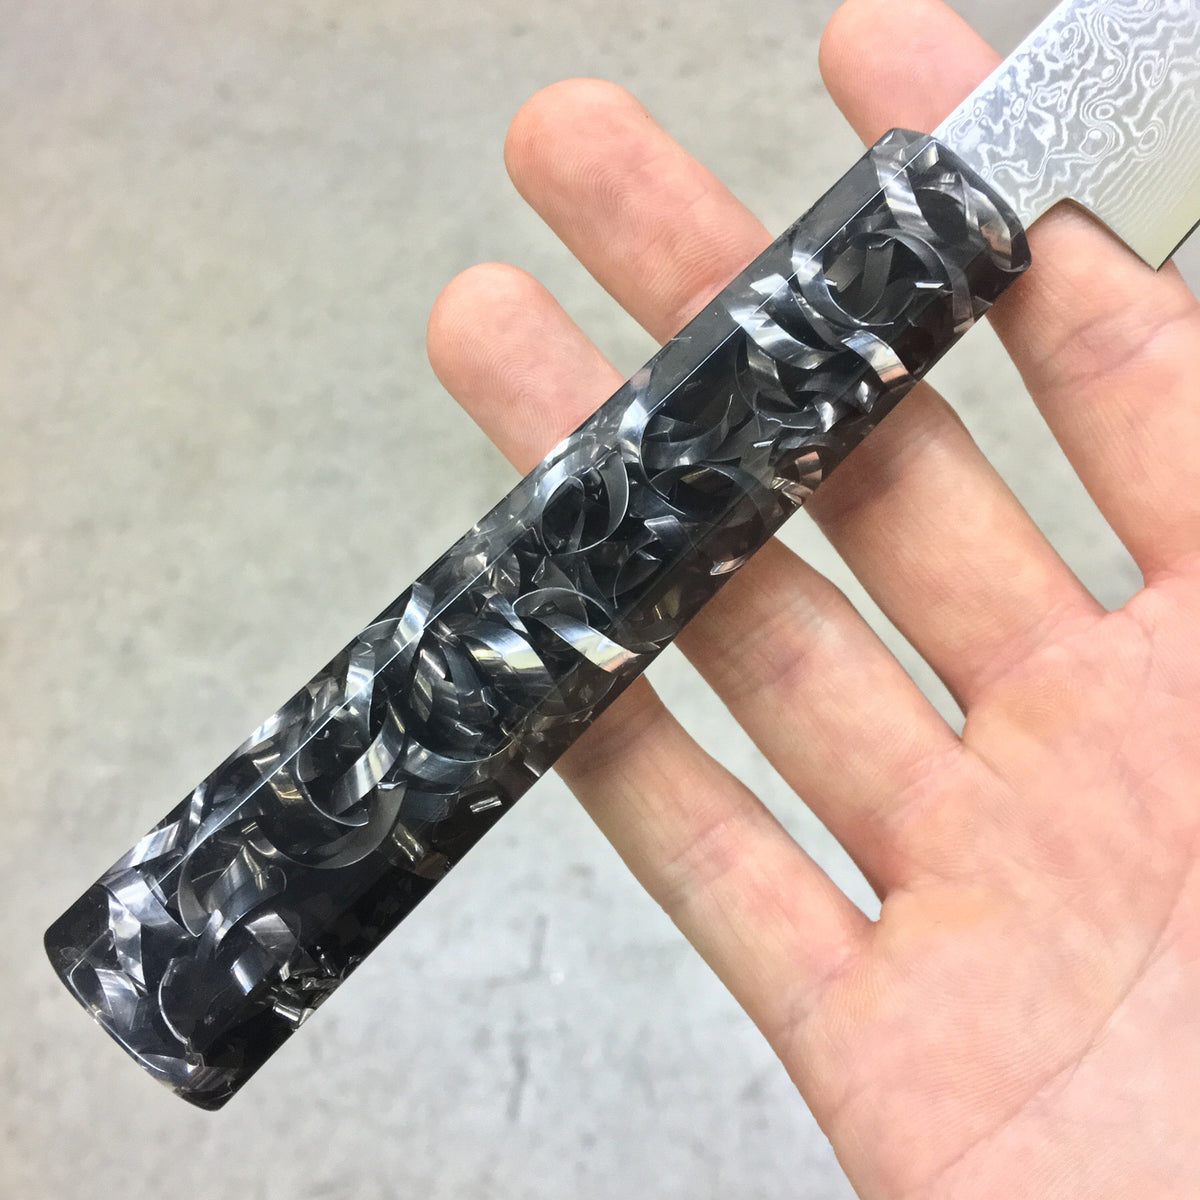 Curly Fries of Steel - 6in Damascus Petty Culinary Knife